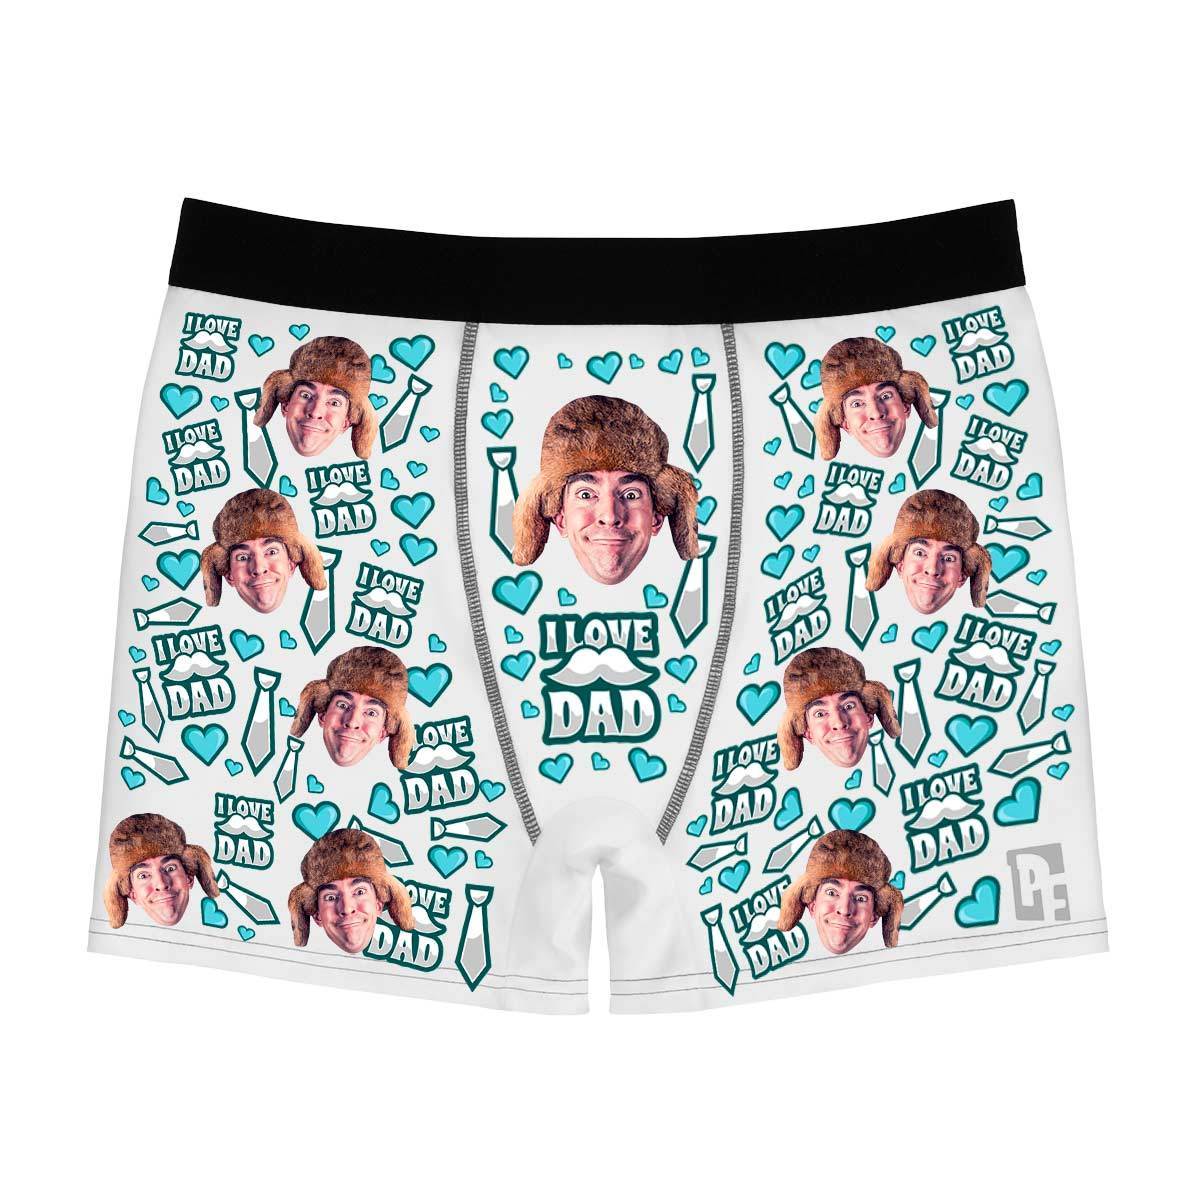 White Love dad men's boxer briefs personalized with photo printed on them